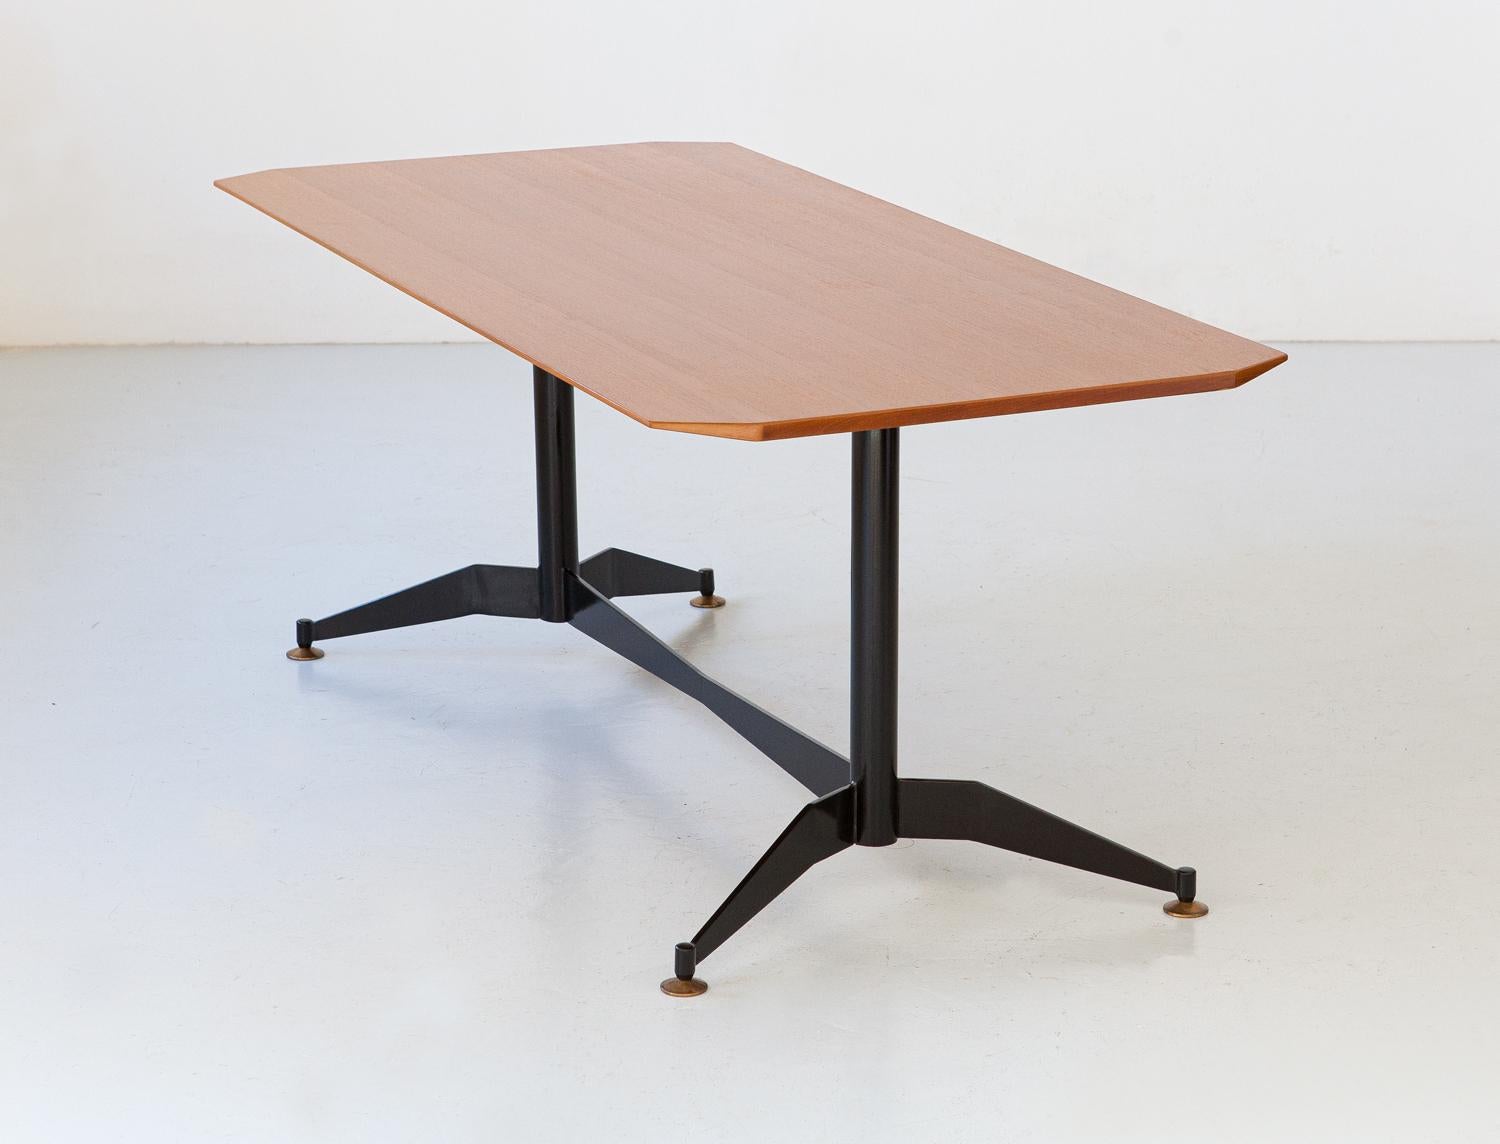 Midcentury Italian Design Dining Table in Teak Wood, Black Iron and Brass Feet  For Sale 5